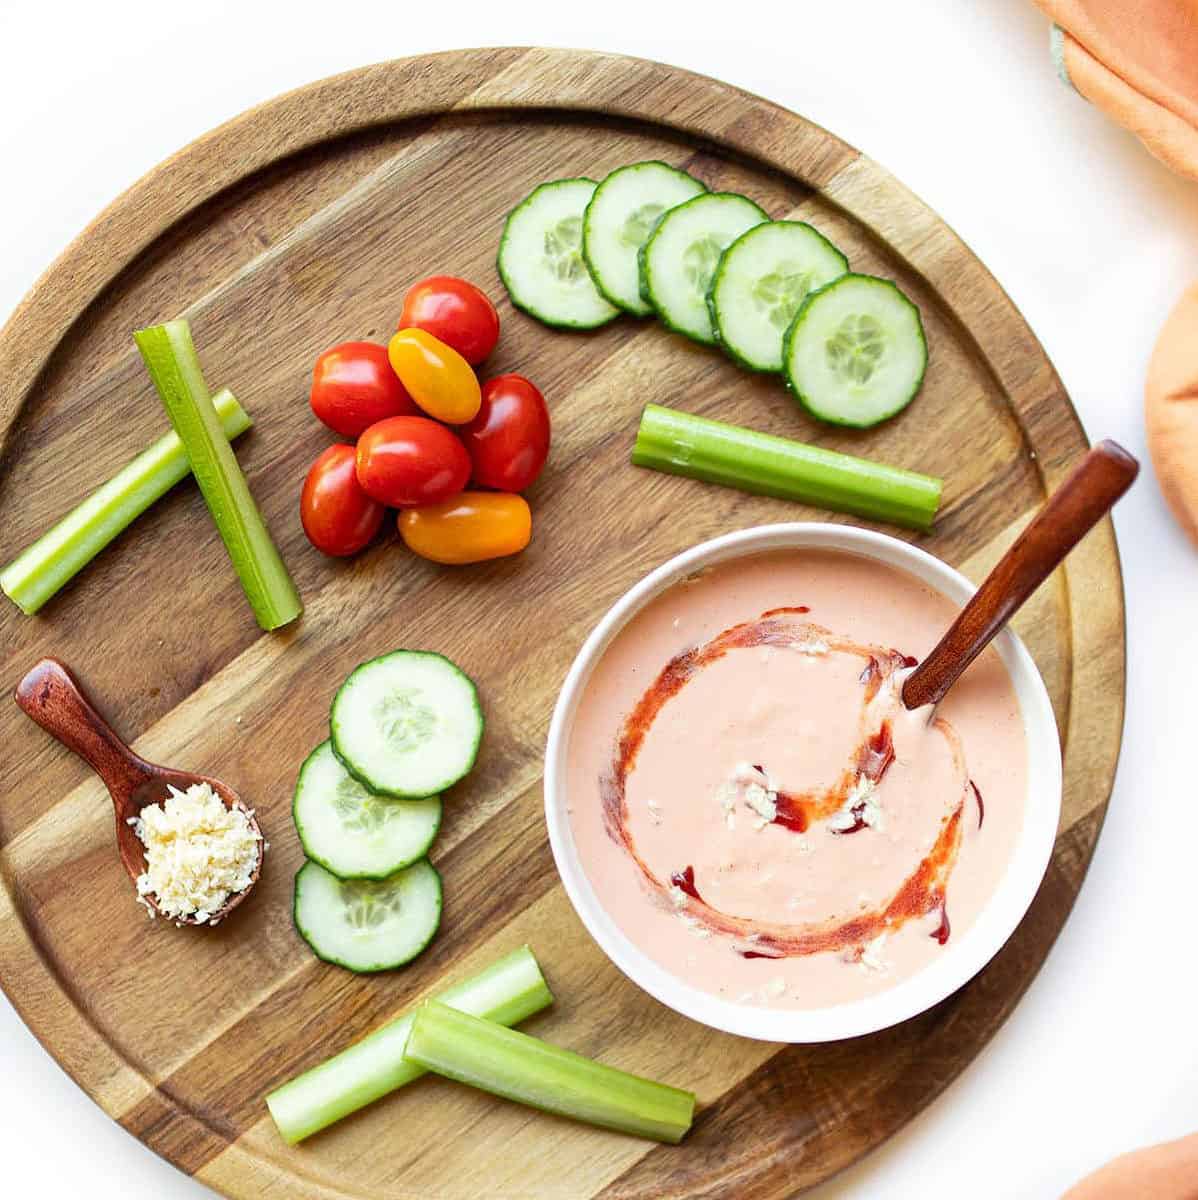  A healthier alternative to traditional Russian dressing for your veggies!